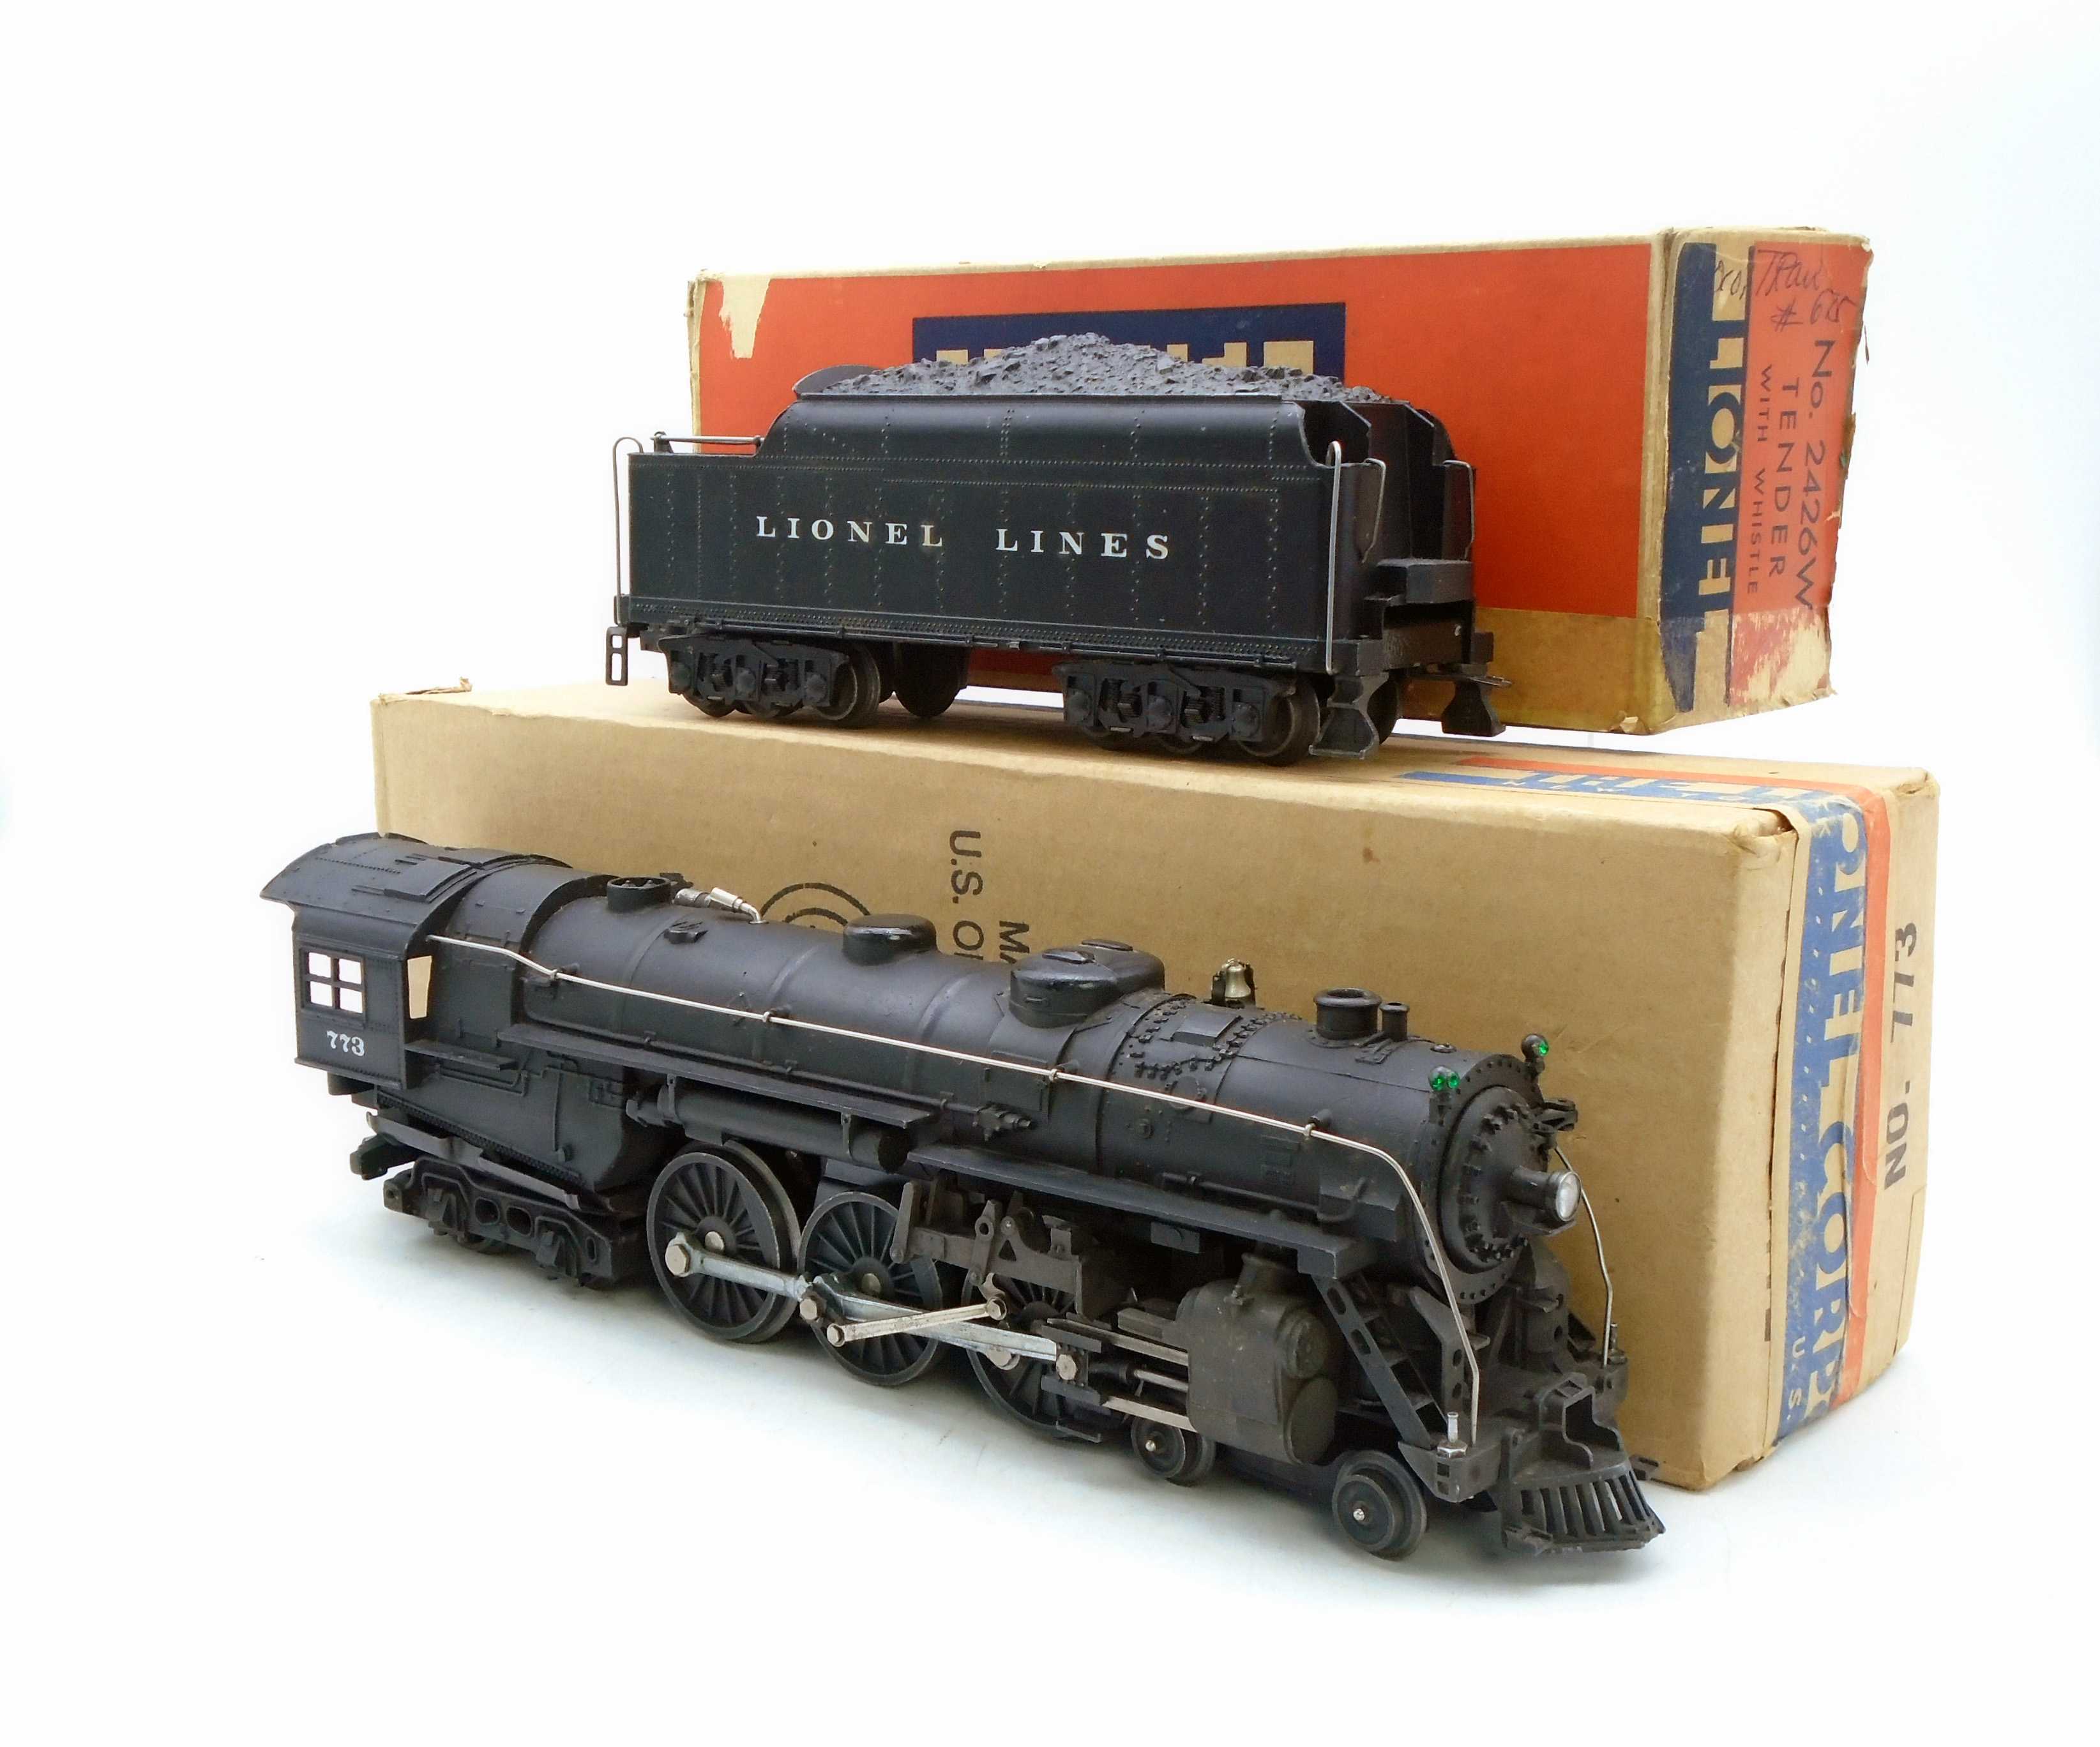 1950 Lionel no. 773 with no. 2426W whistle tender in original boxes, estimated at $500-$700 at Lloyd Ralston Gallery May 18.